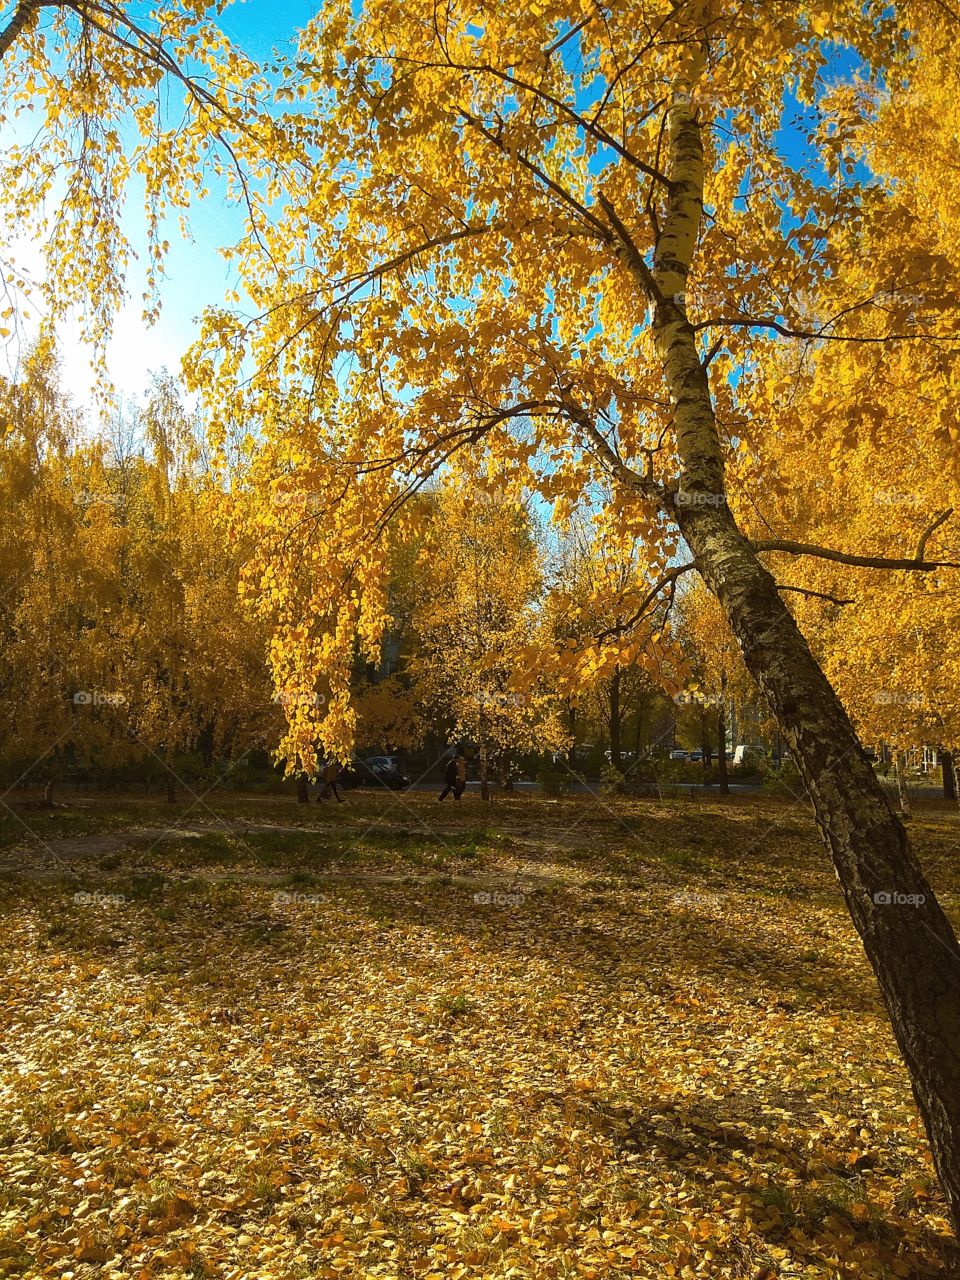 City square (Russia), trees covered with golden foliage and a lawn strewn with lawn of grass on a sunny autumn day under a blue sky.